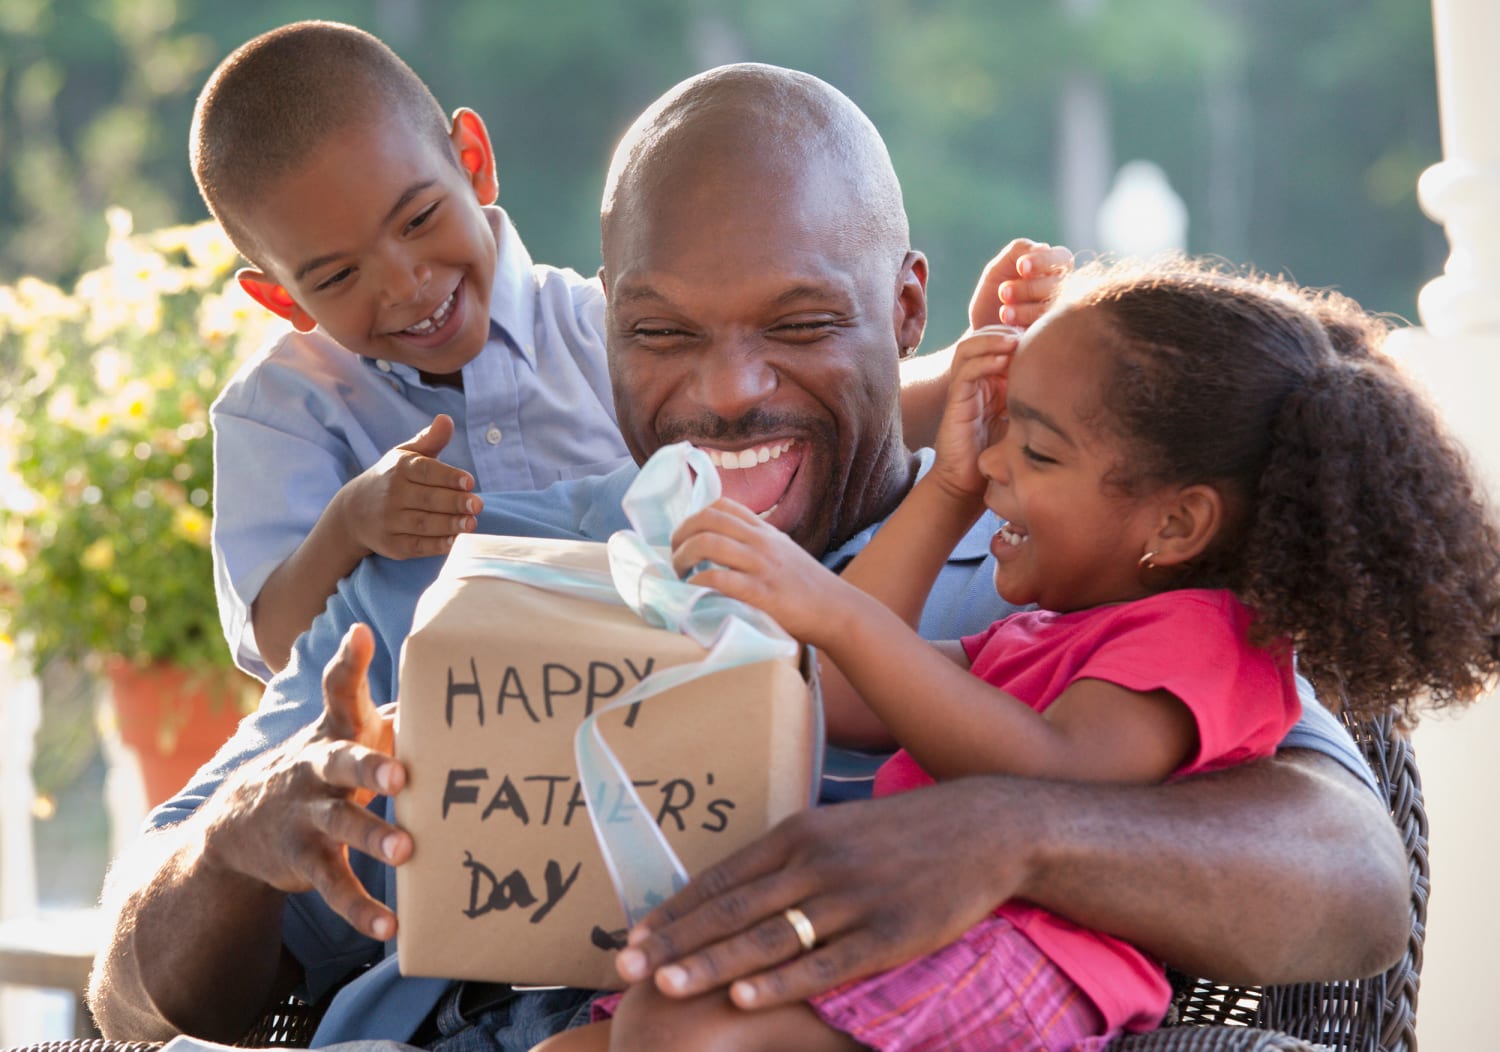 When is Father's Day? Discover the Date for Father's Day Celebration